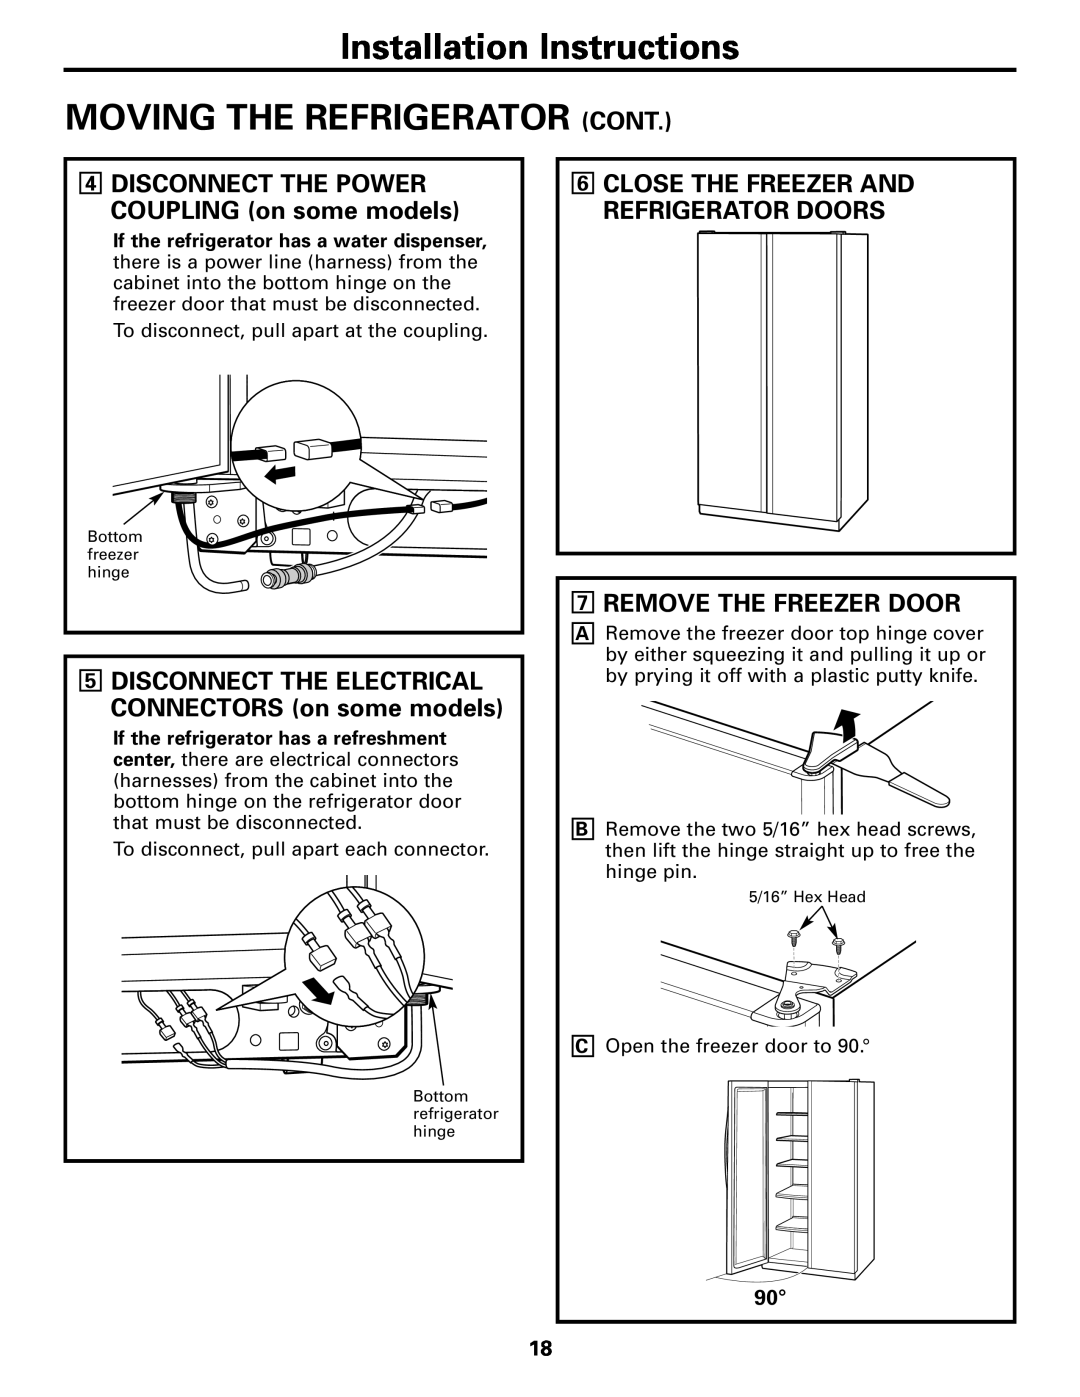 GE 200D26000P022 installation instructions Installation Instructions MOVING THE REFRIGERATOR CONT, Remove The Freezer Door 